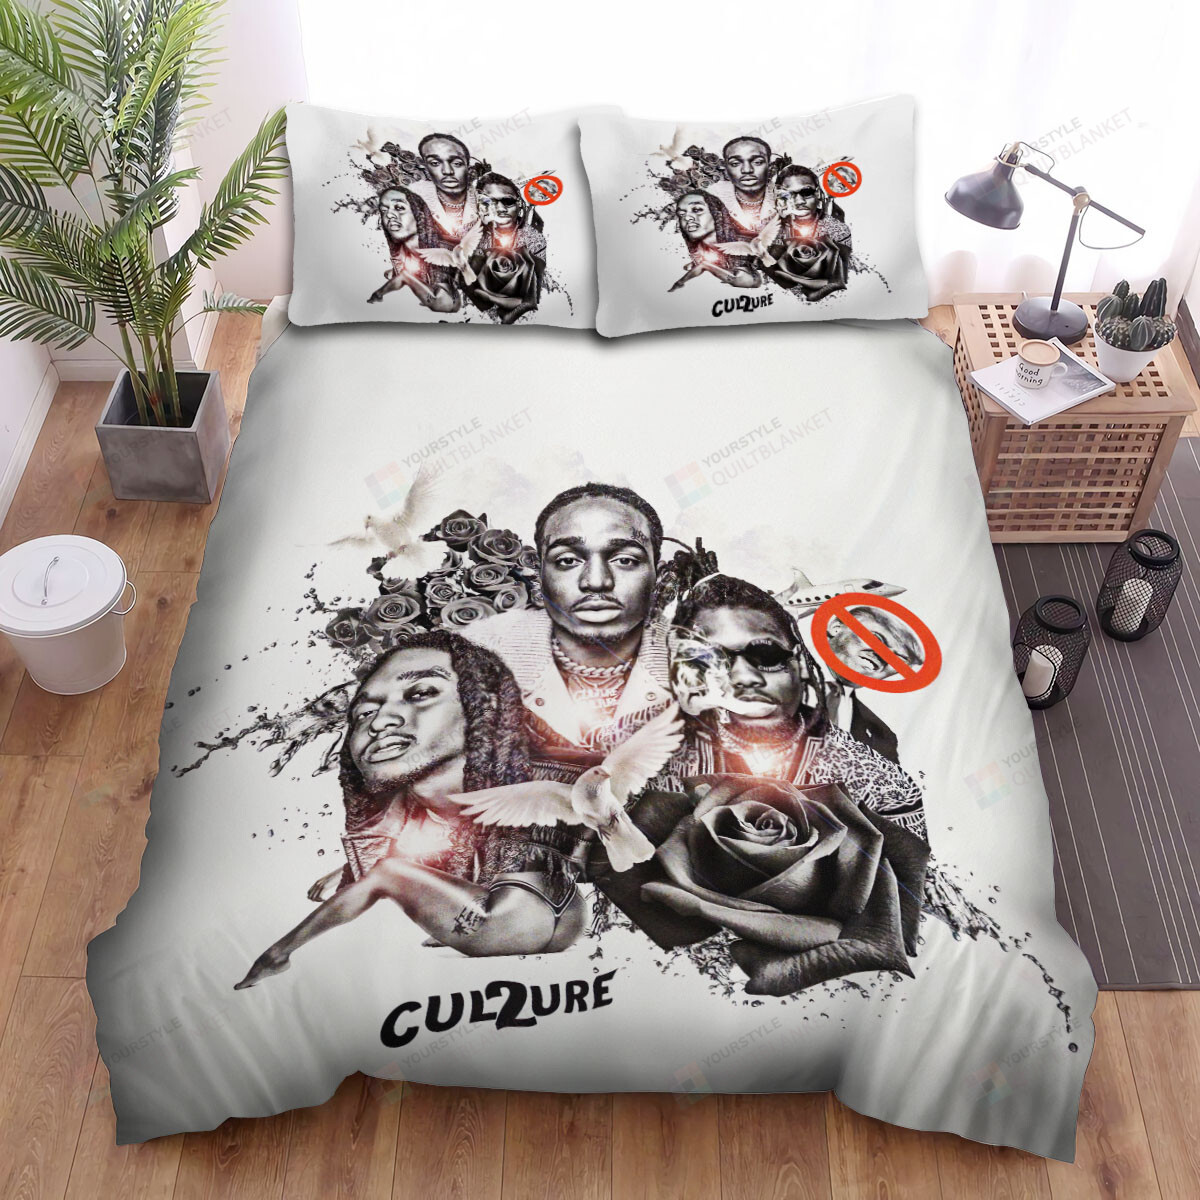 Migos Culture Ii In Black & White Bed Sheets Spread Comforter Duvet Cover Bedding Sets